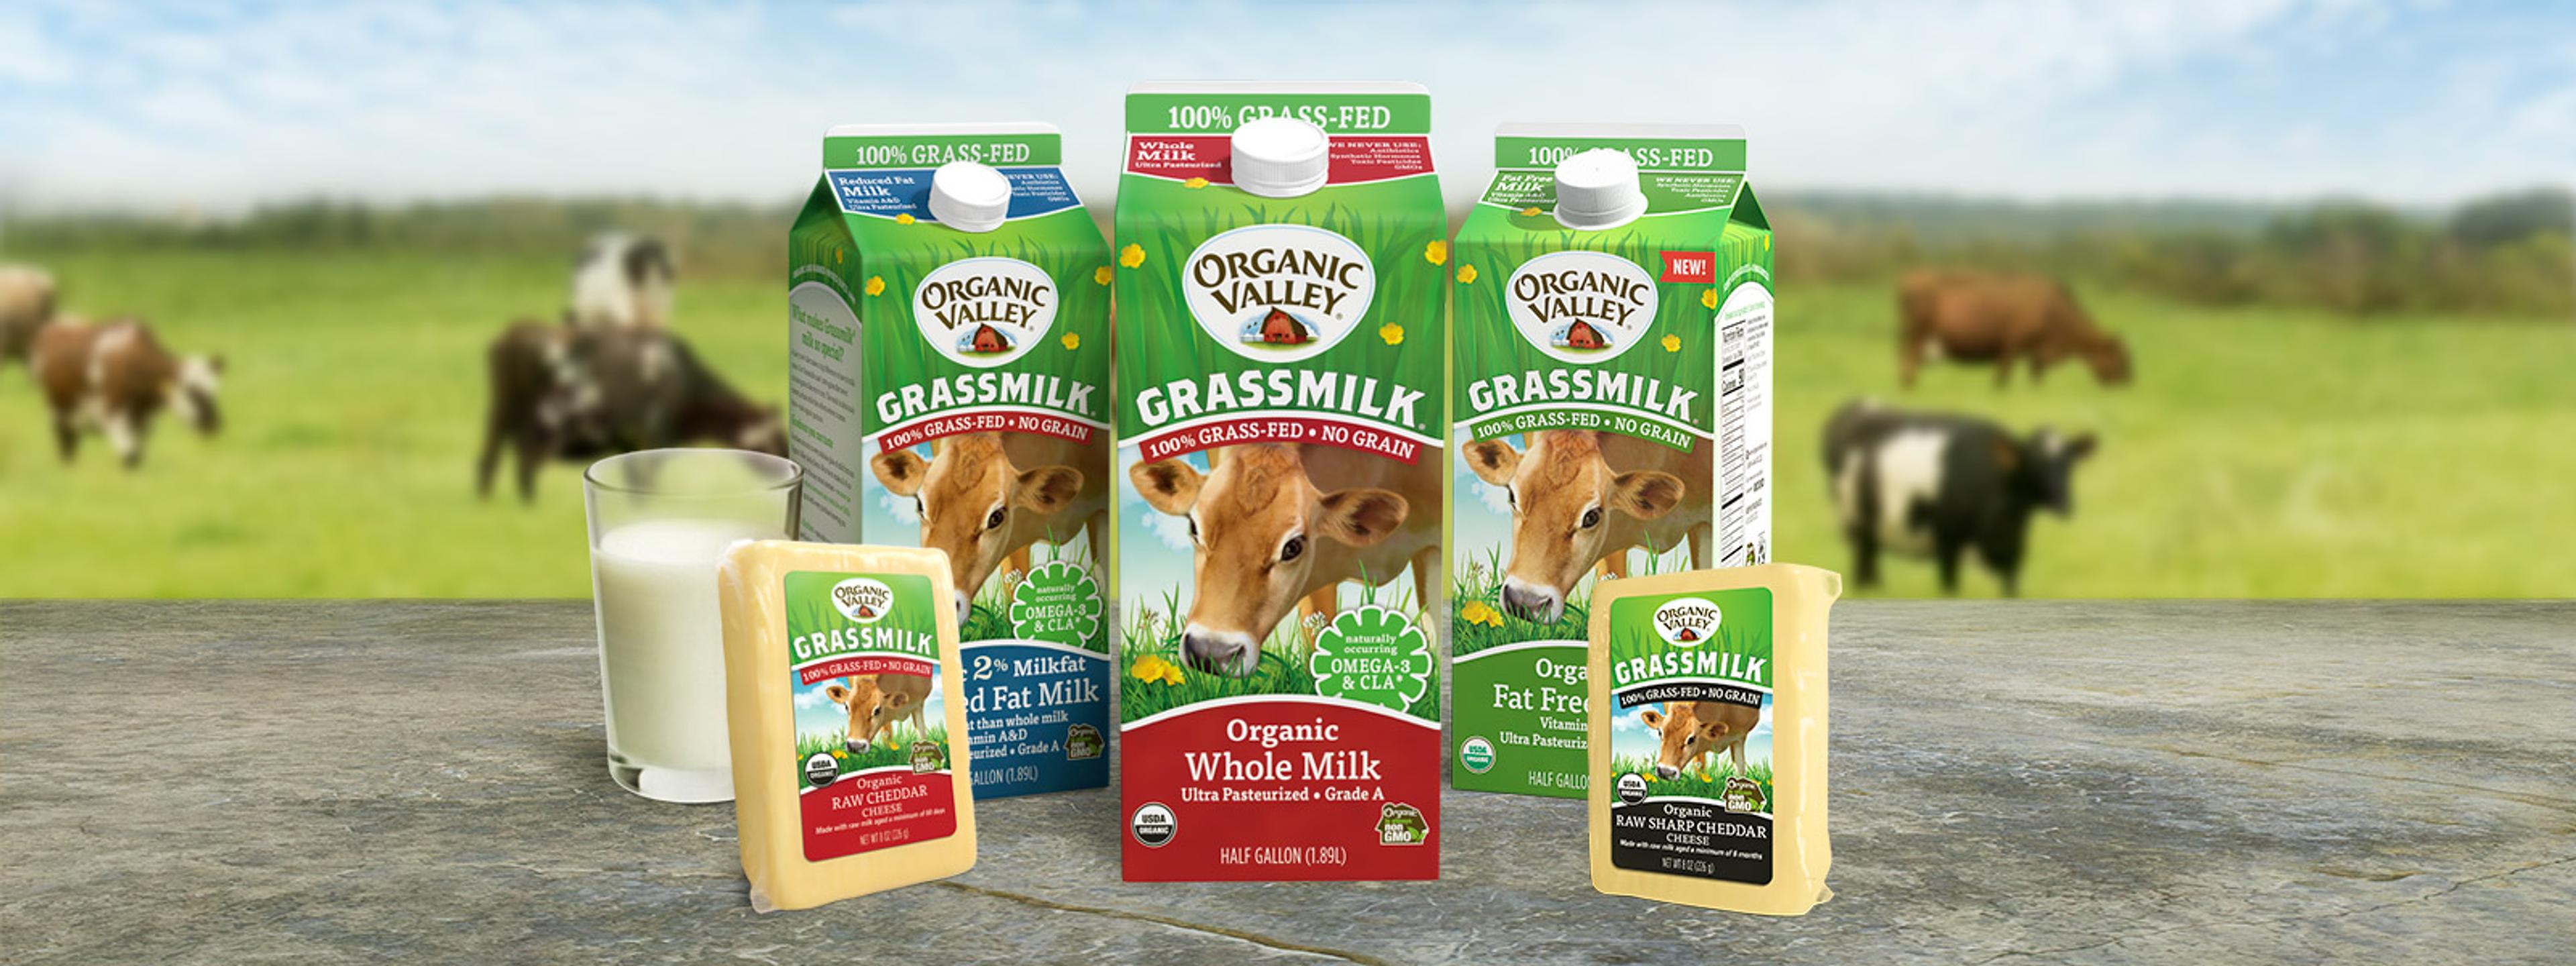 Organic Valley Grassmilk products displayed on a table top.